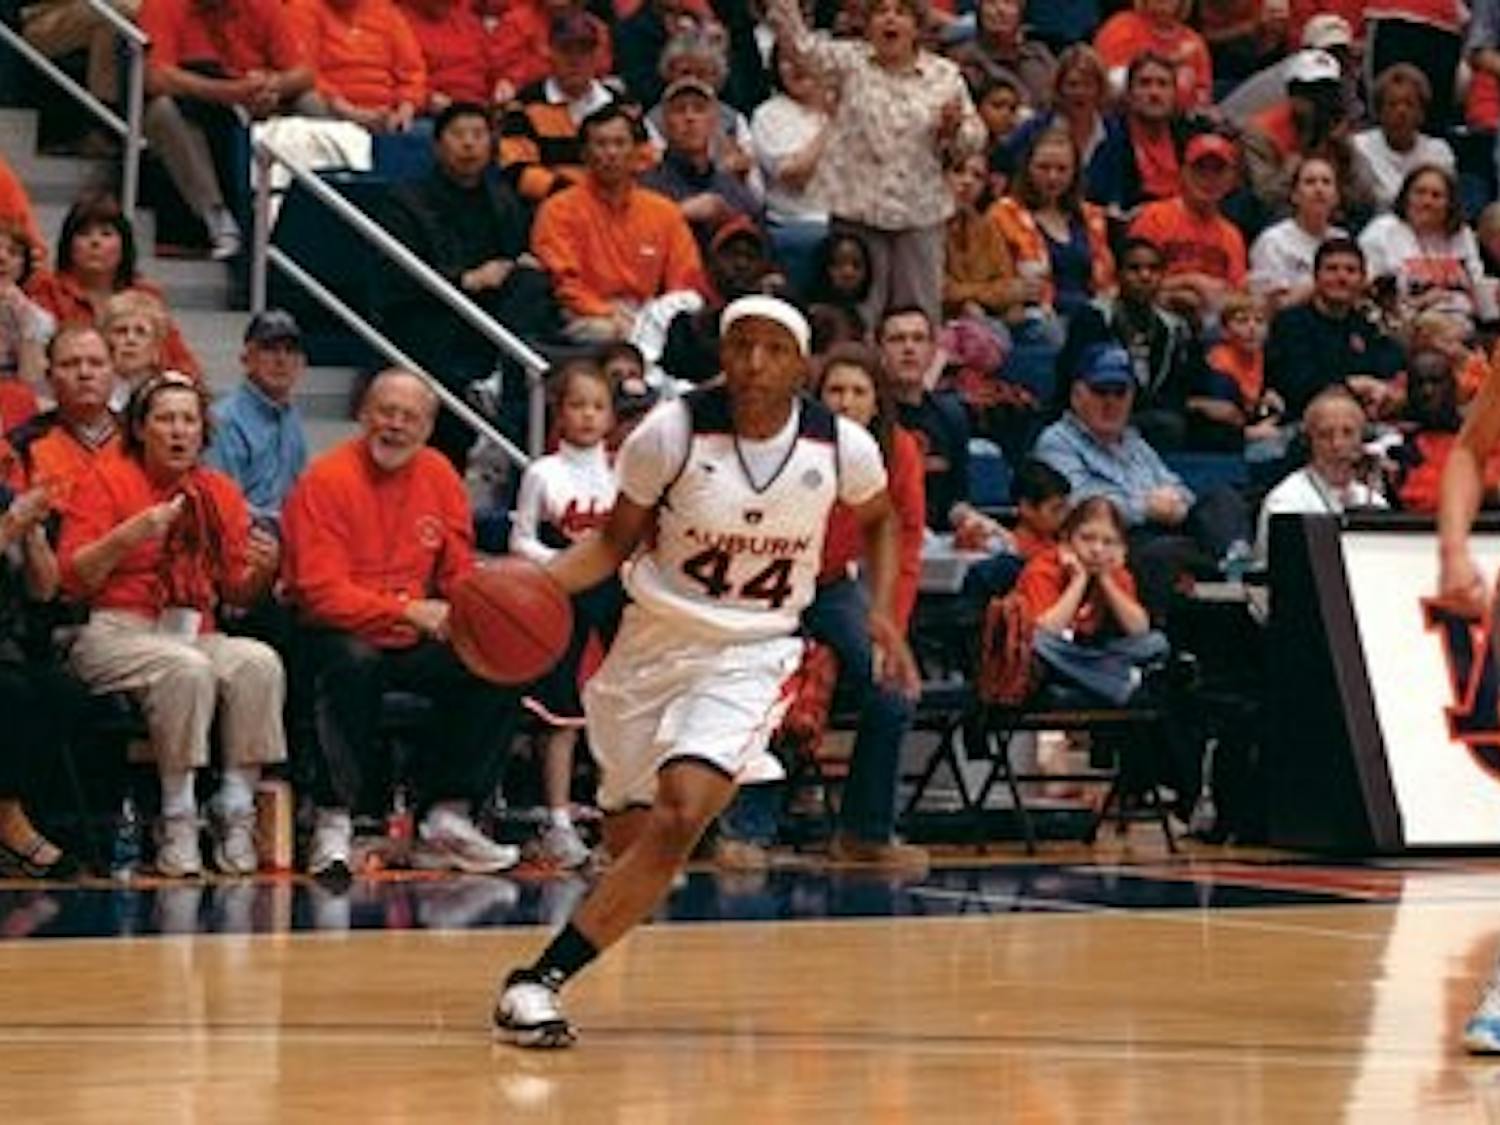 In the 2009 Tennessee game Boddie scored 17 points in front of a record-breaking crowd. The Tigers defeated defending national champions Tennessee 82-68.